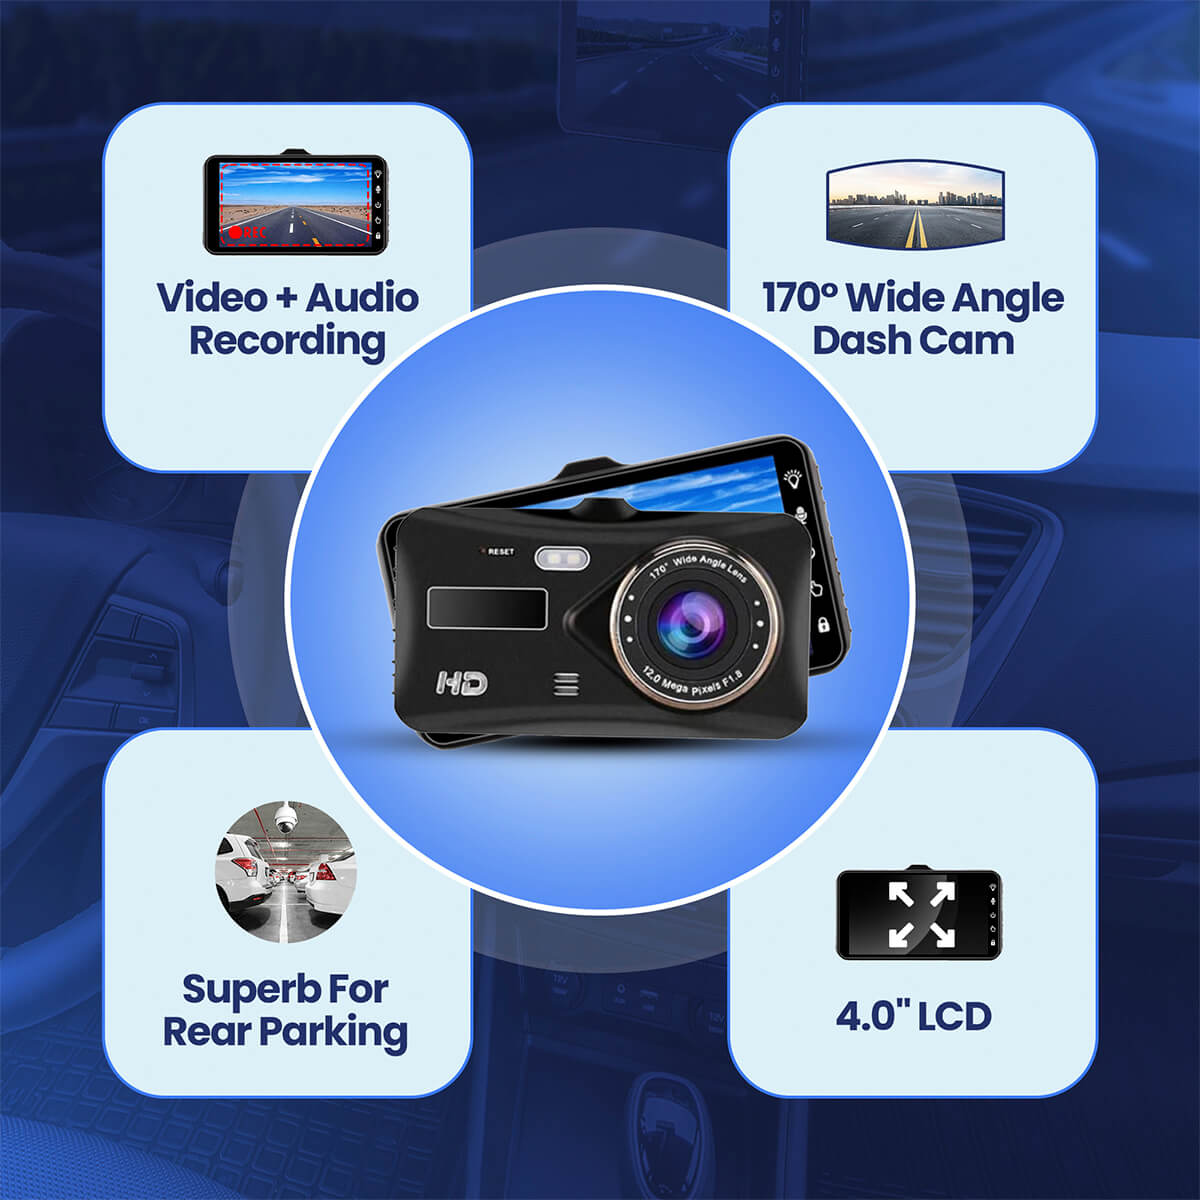 DashVision Dash Cam Pro offers rear parking assistance, a 4-inch LCD, 170-degree wide-angle view, and comprehensive video and audio recording